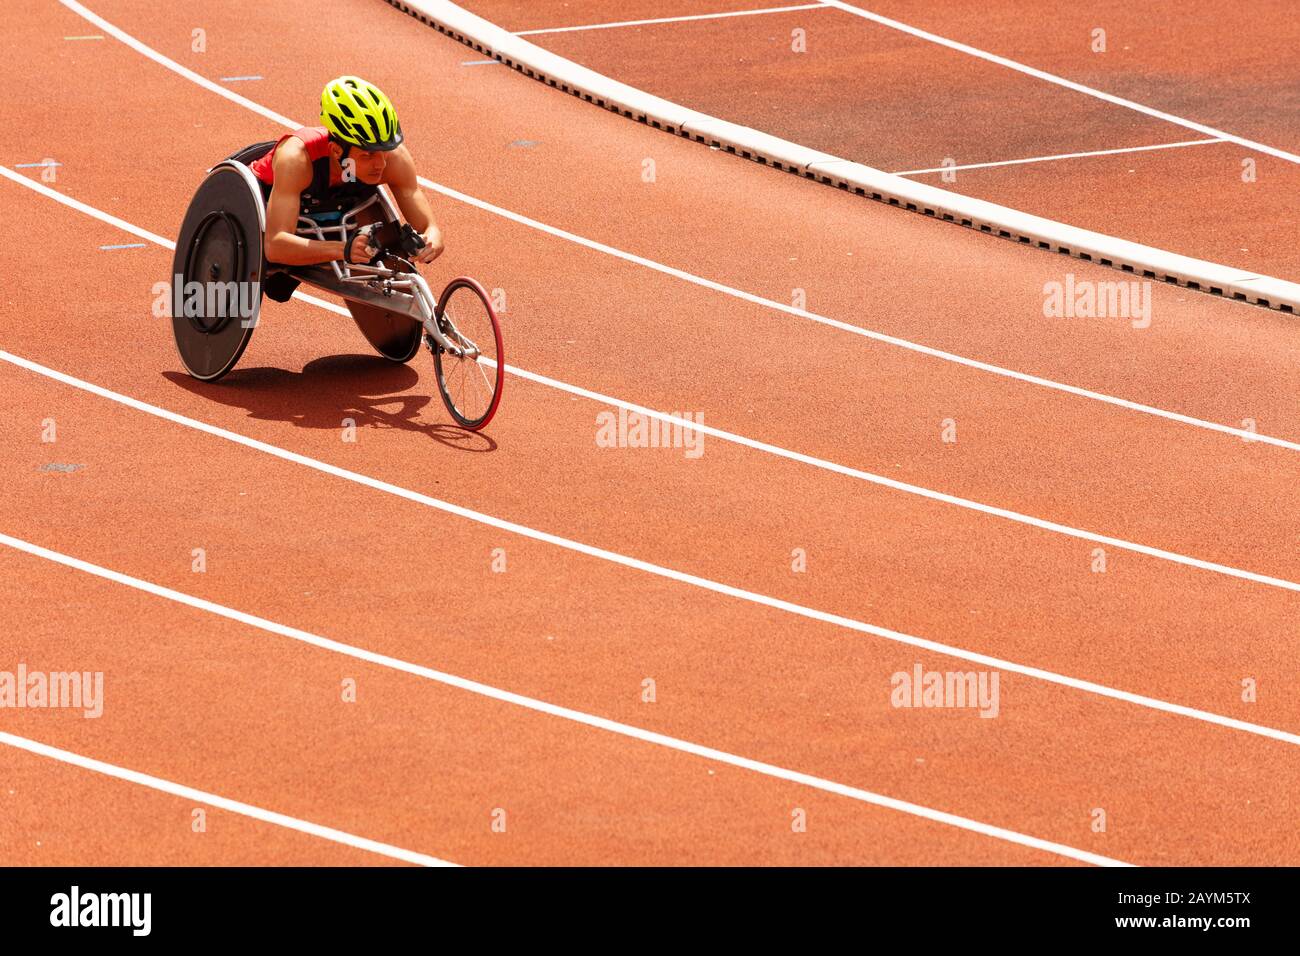 PARIS, FRANCE - JUNE 18, 2018: Disabled handicapped sportsman competition with man on handbike sport wheelchair Stock Photo